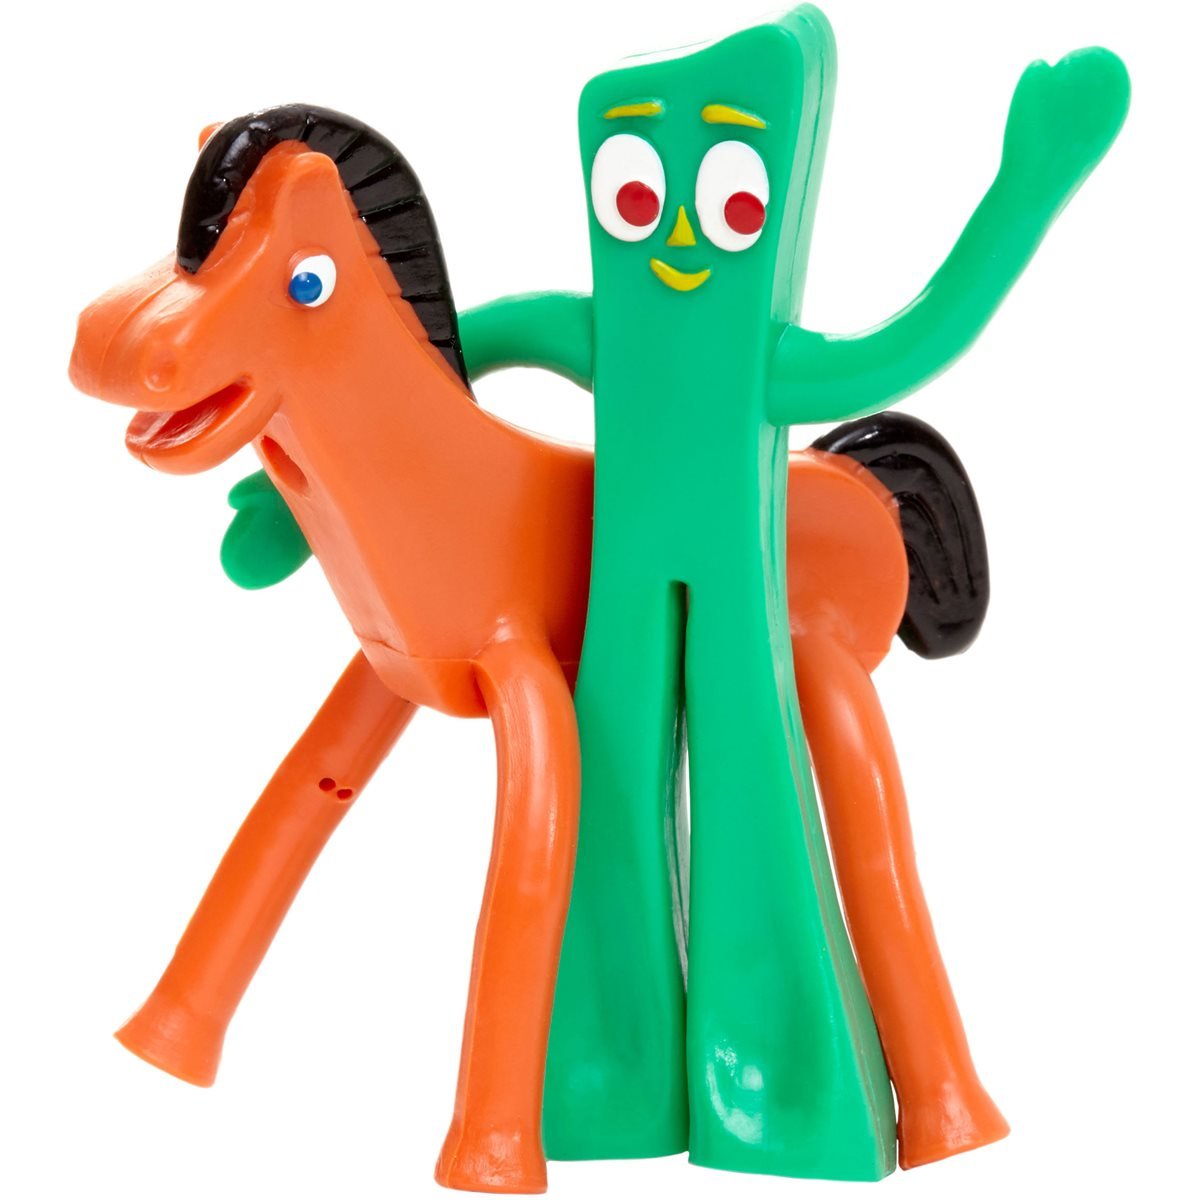 Gumby and Friends Gumby and Pokey Mini Bendable Figure 2-Pack.